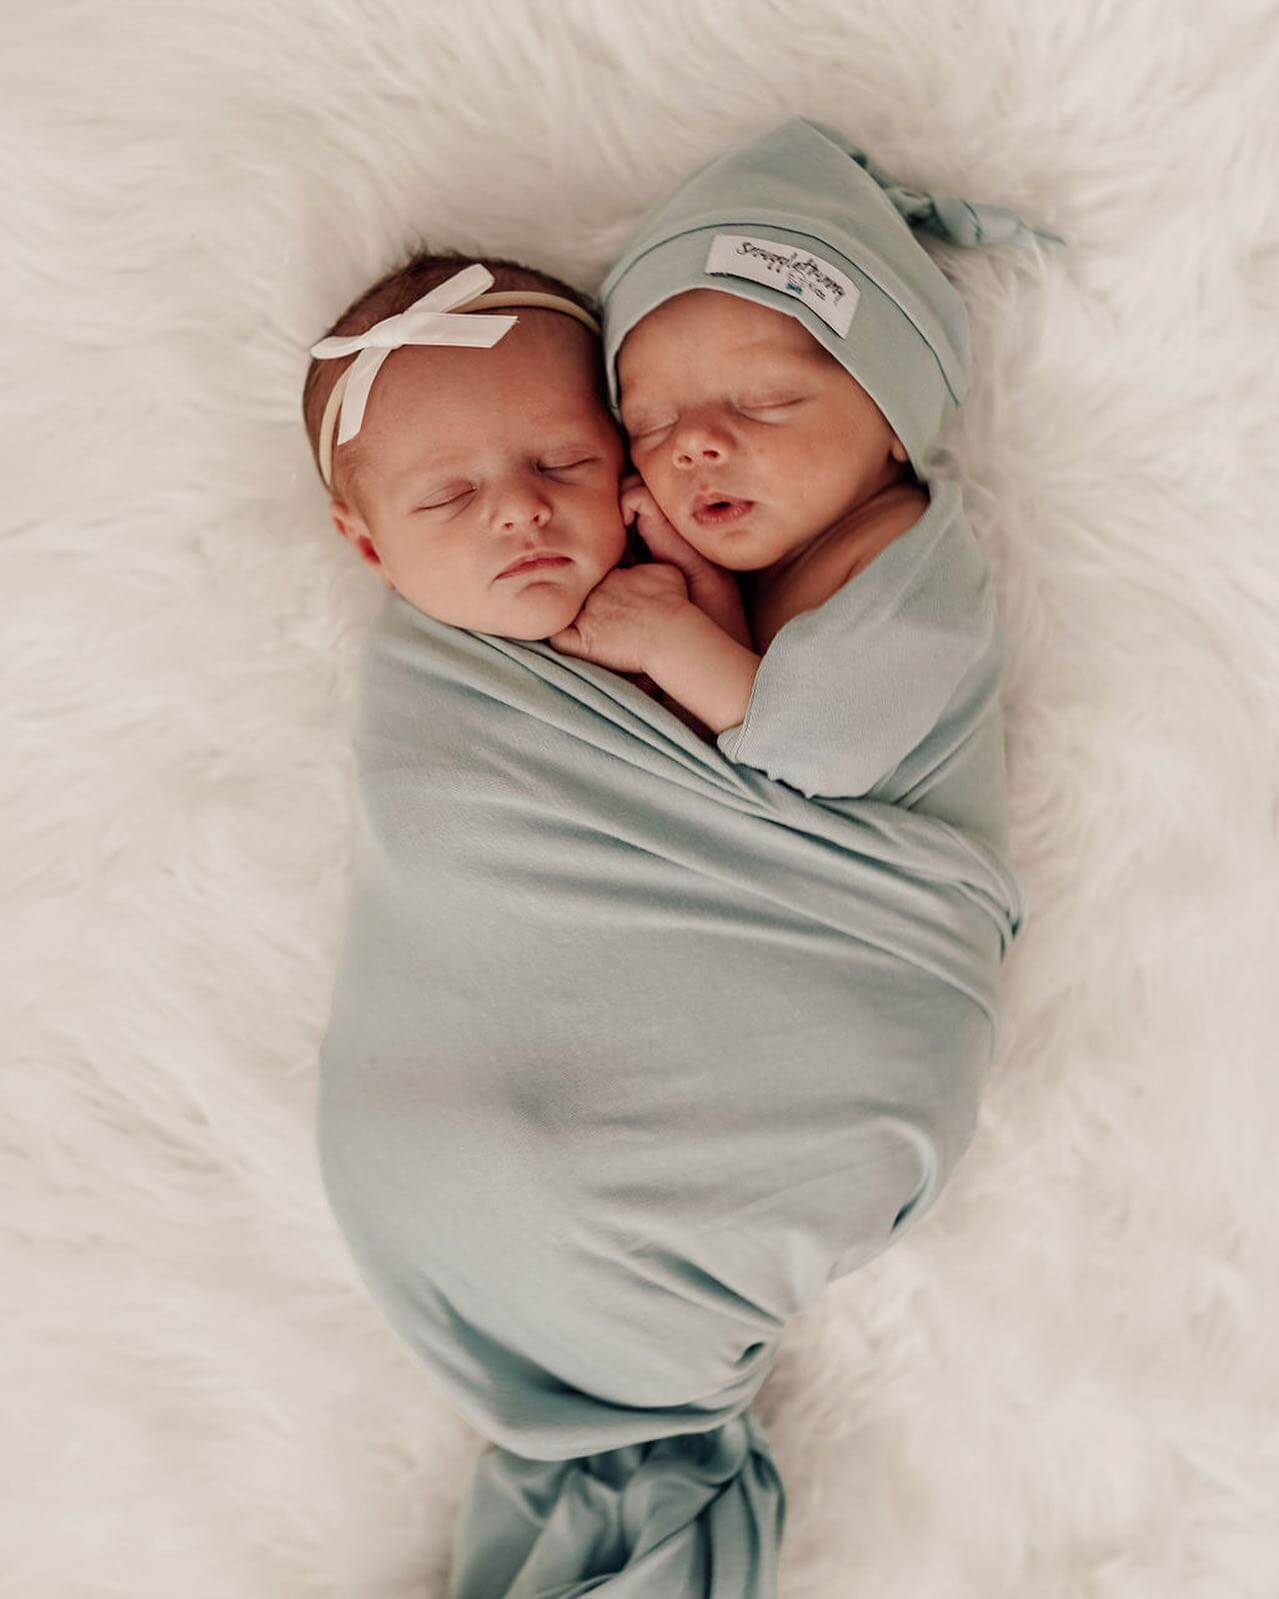 How to survive the first few months with twins